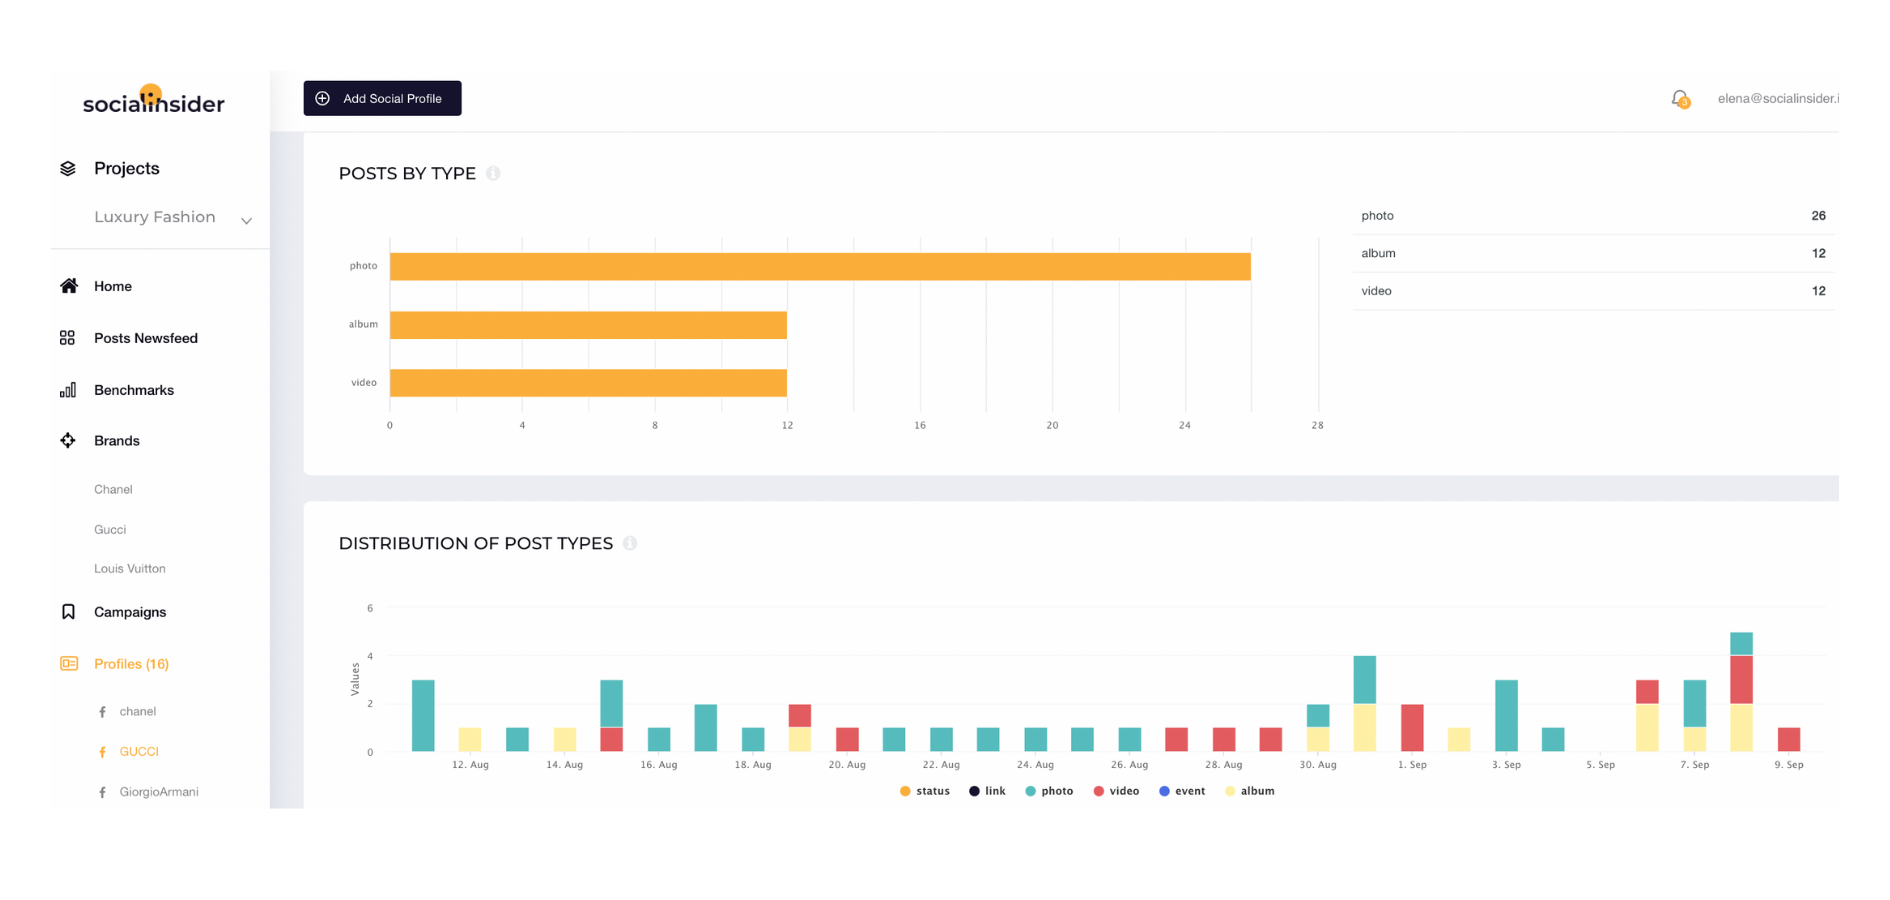 Here is an example of social media insights you can gain by doing a competitor analysis.